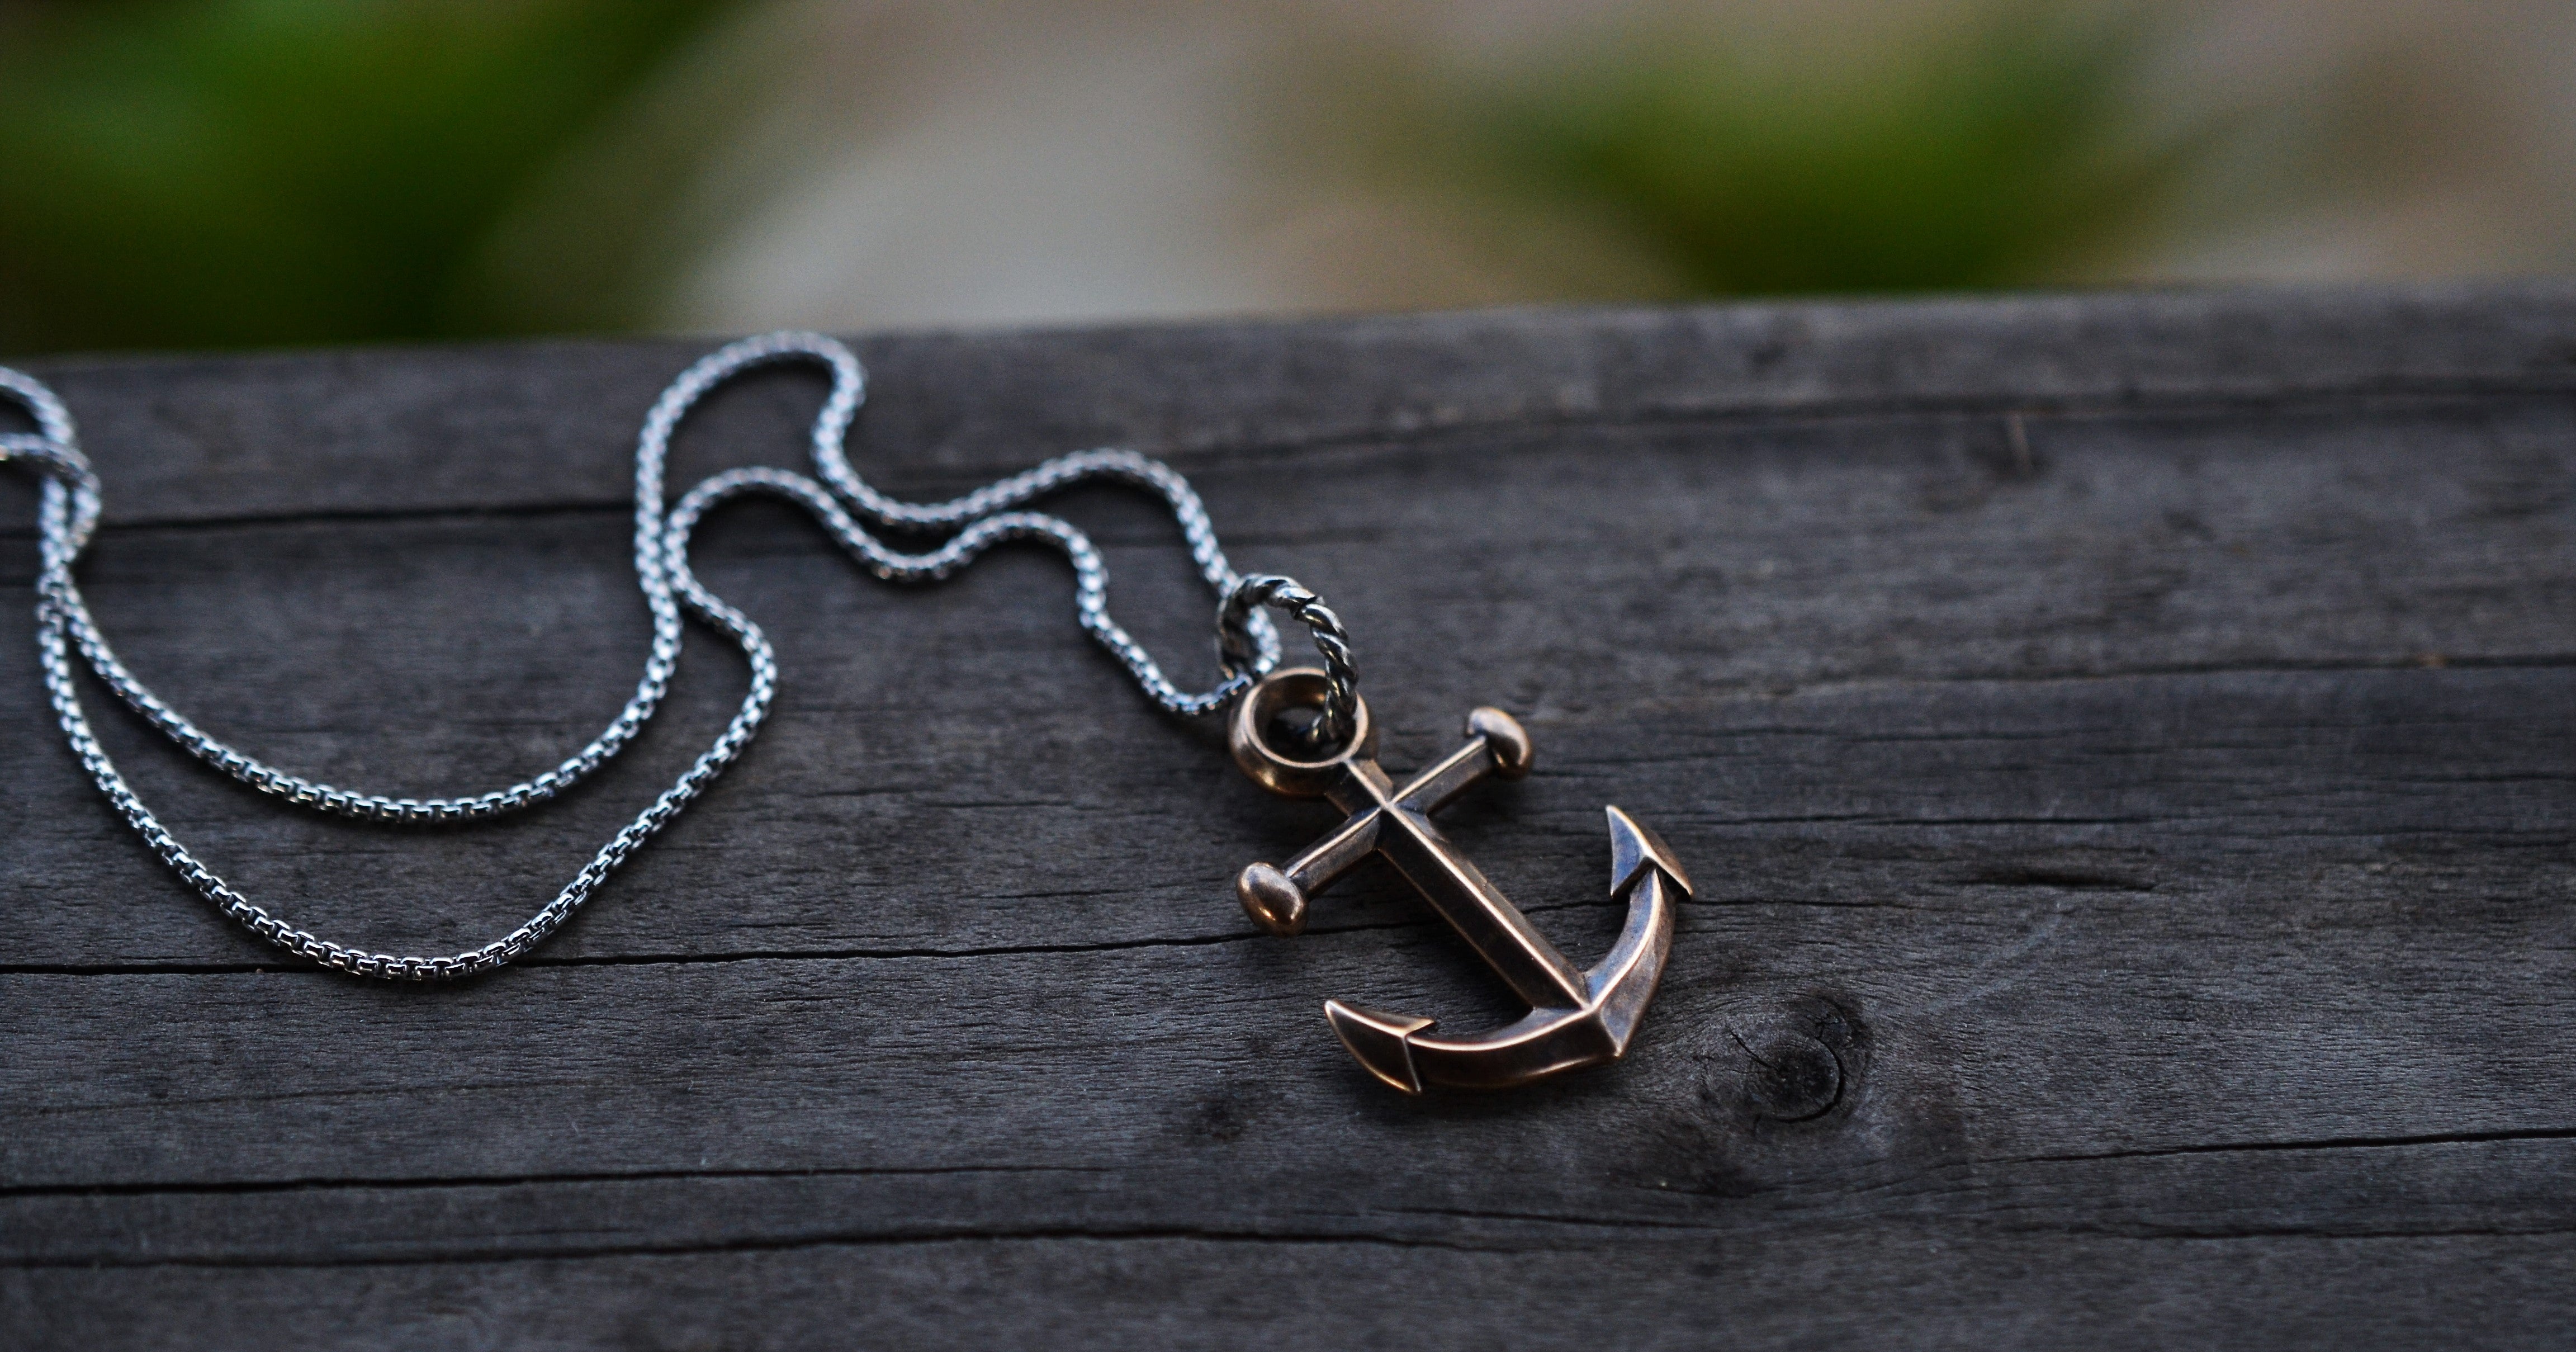 Bronze Anchor Charms - 16" or 18" Chain Included